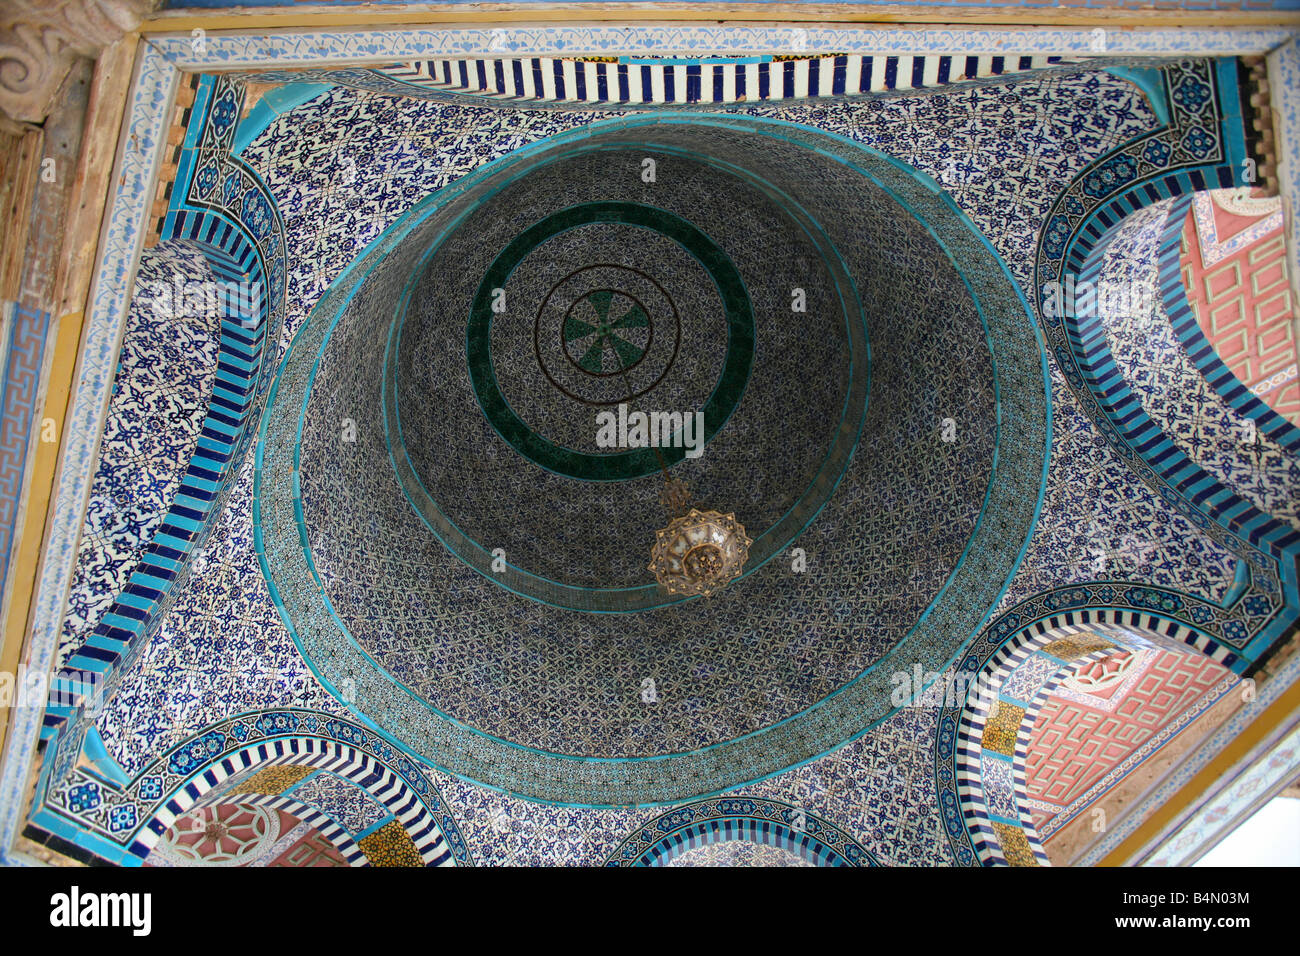 The Mosaic Interior Cupola Of The Dome Of The Rock On Temple